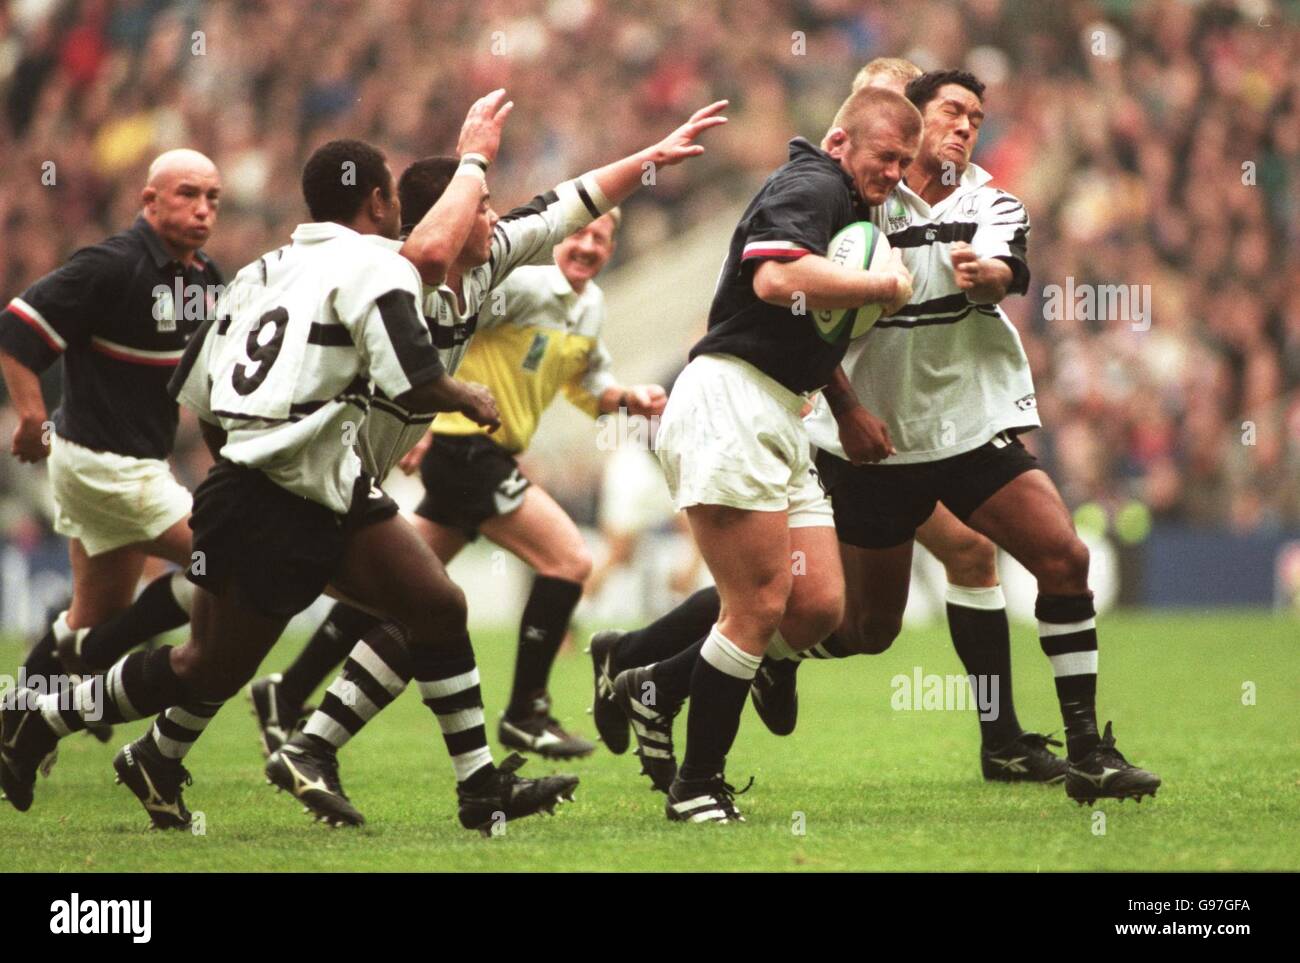 Rugby-Union - Rugby World Cup 99 - Quarter Final Play Off - England V Fidschi Stockfoto